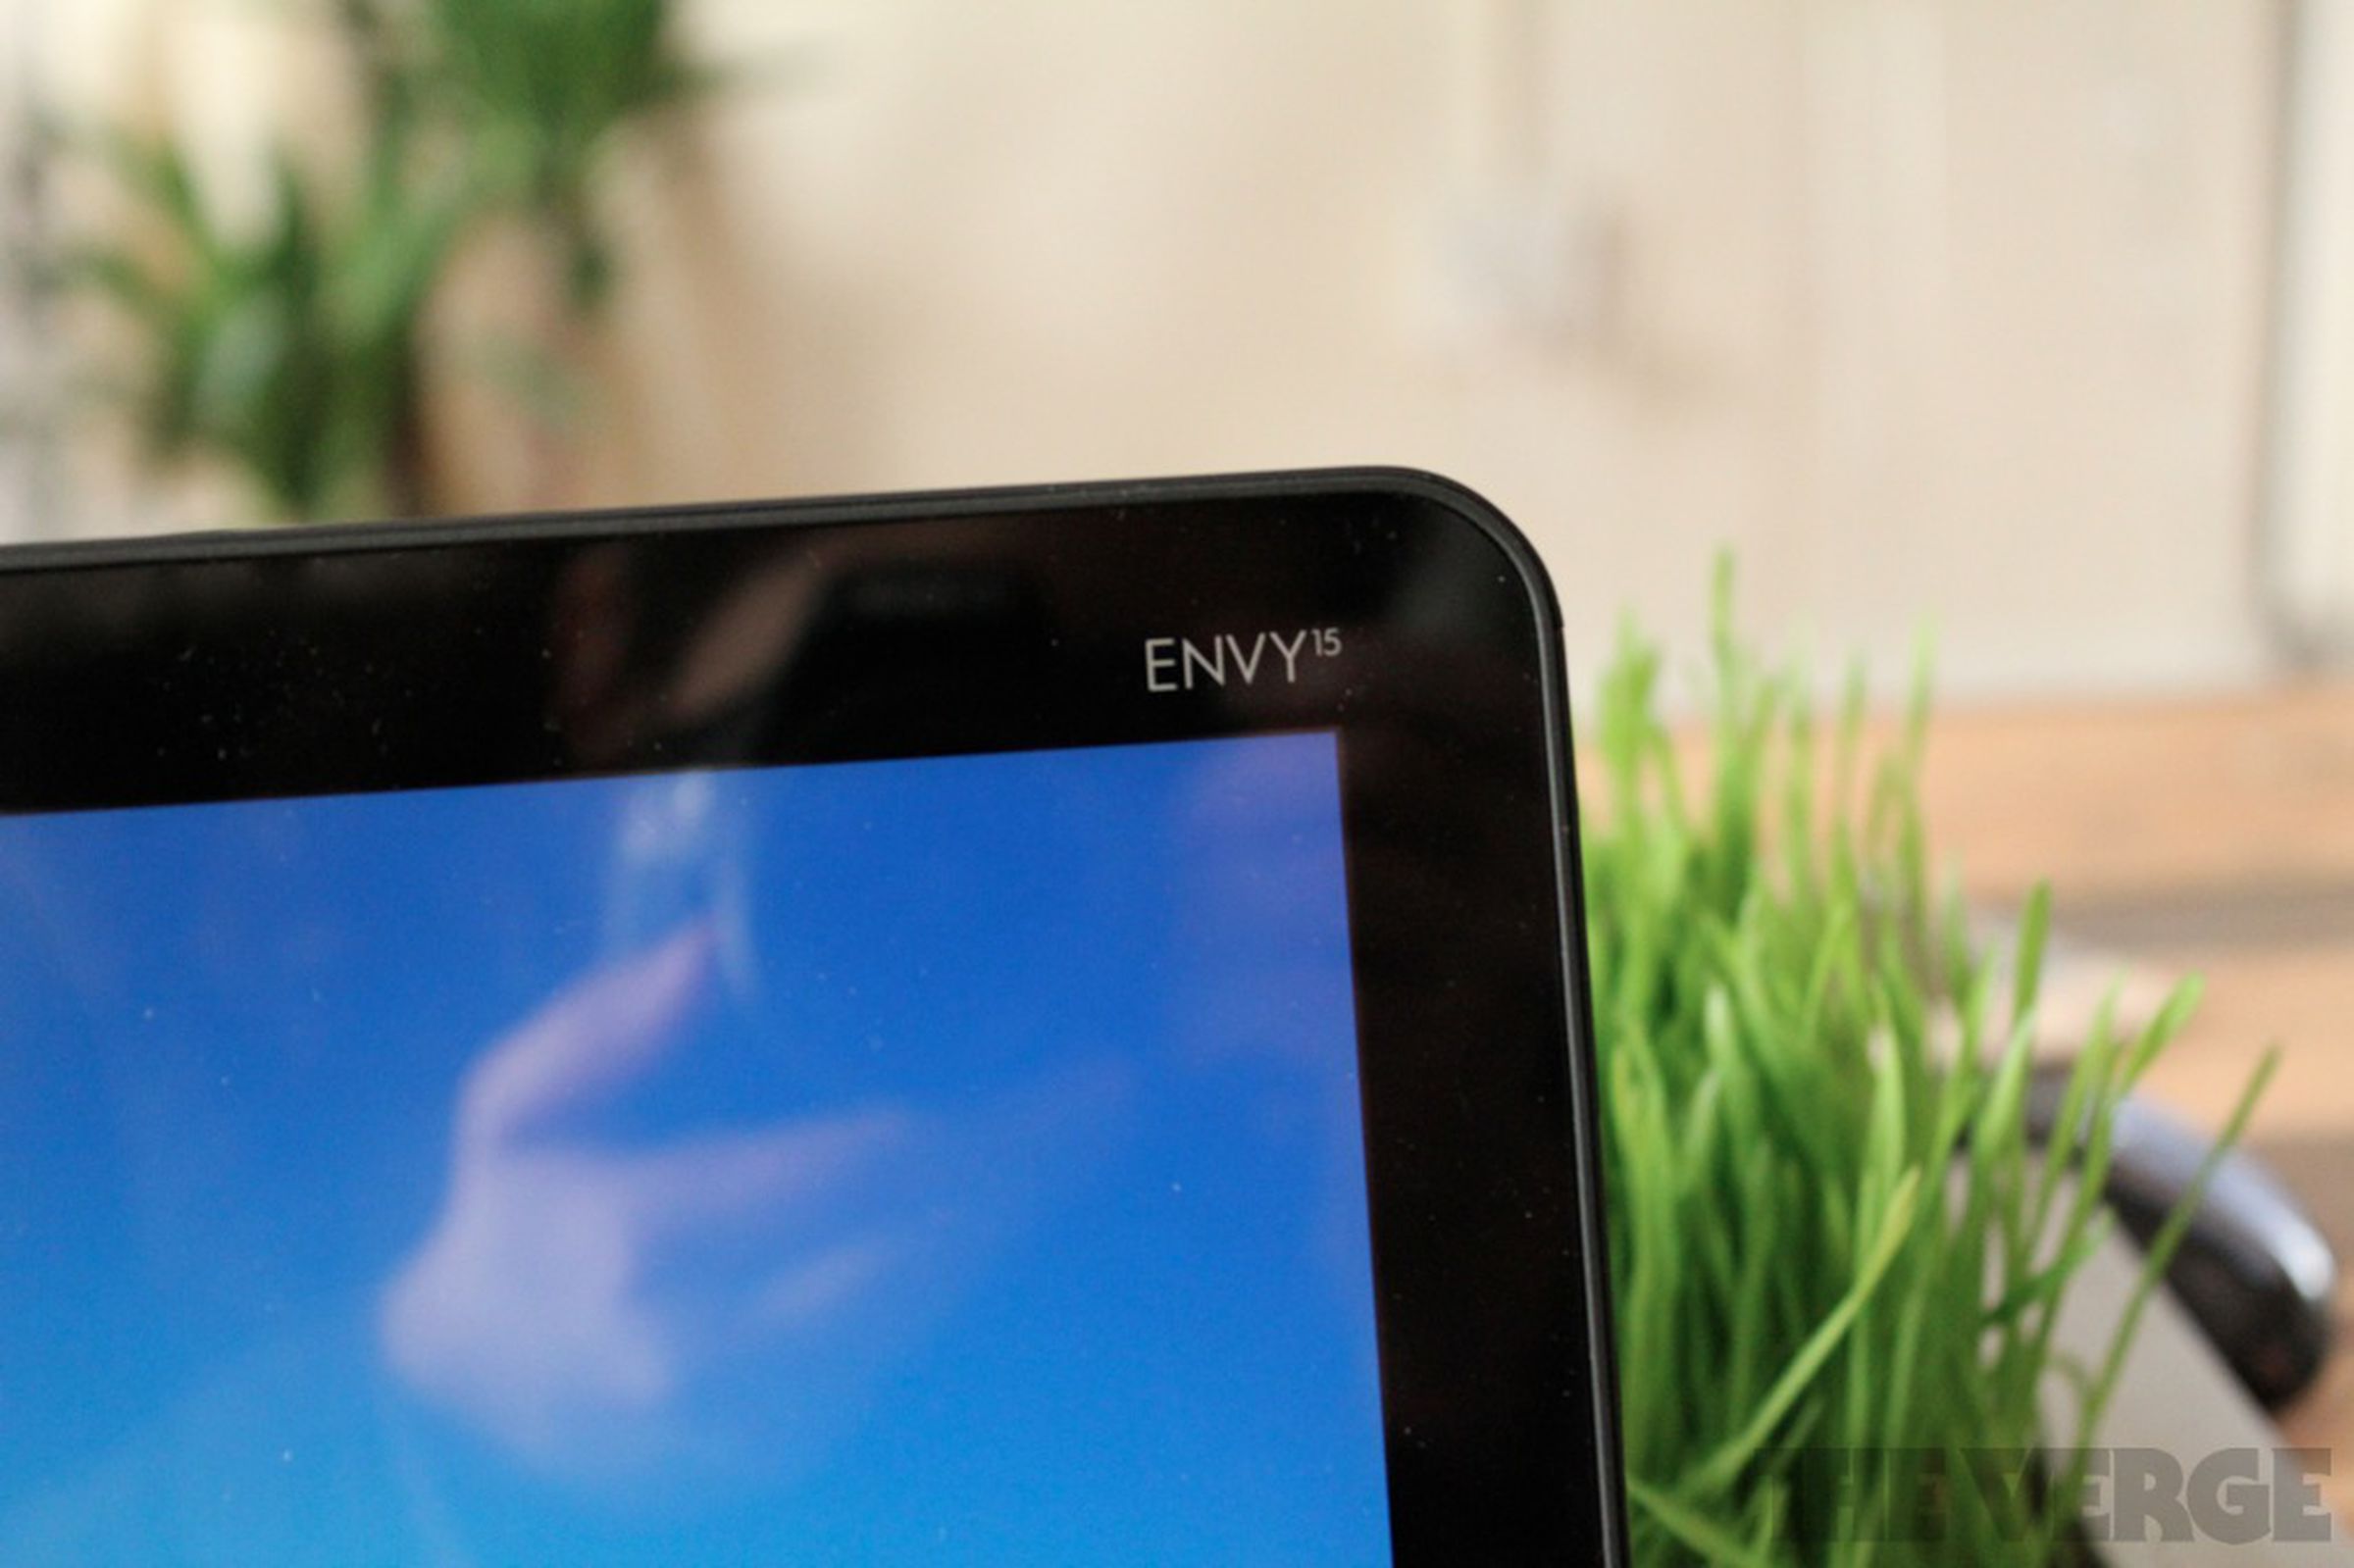 HP Envy 15 and 17 hands-on photos